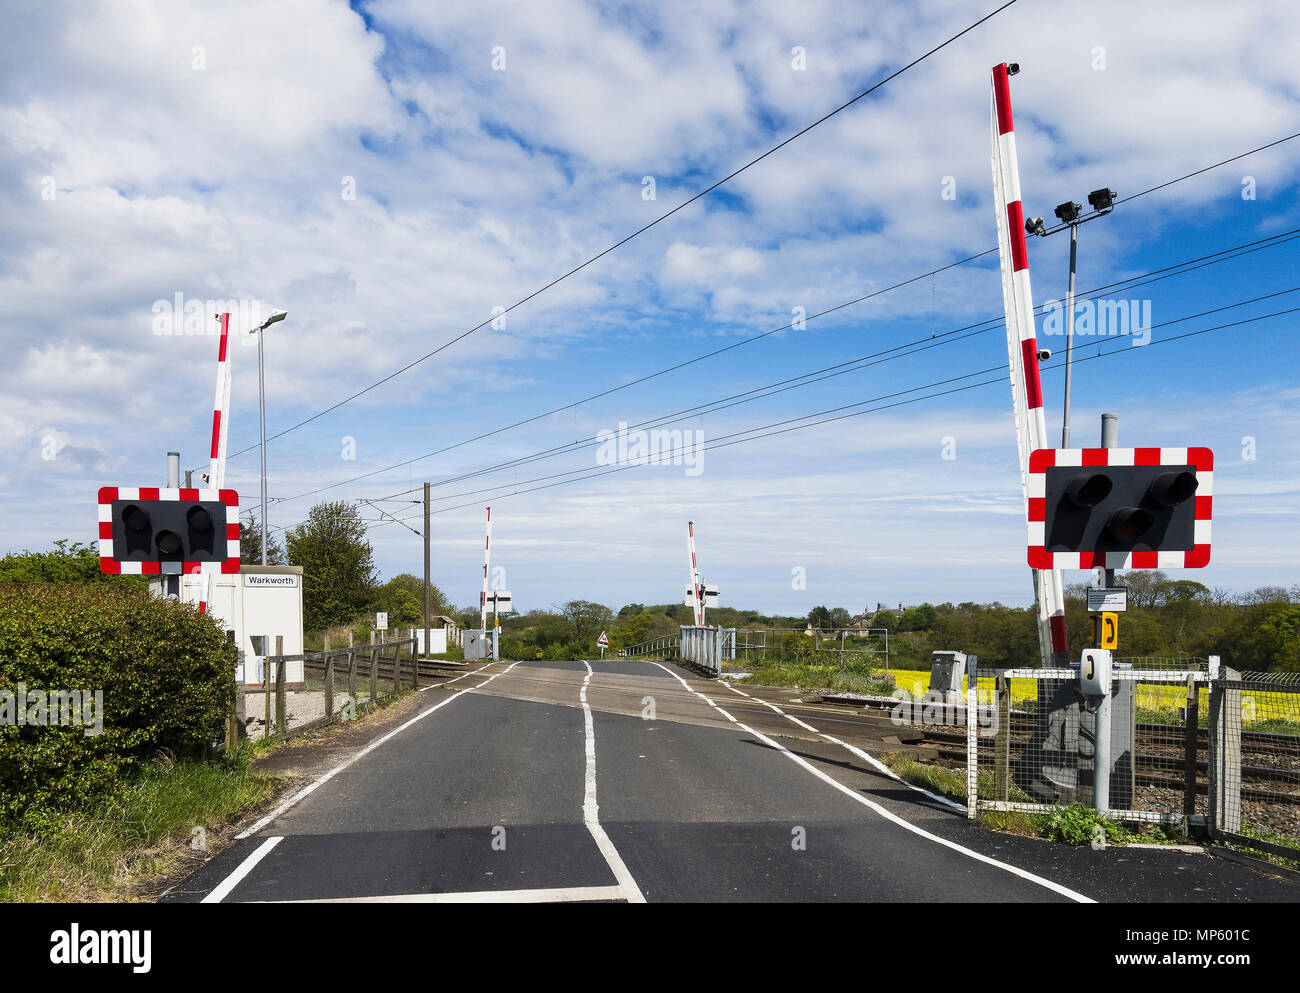 Level crossing with raised barrier over railway lines at Warkworth, Northumberland, UK which services passenger and freight trains. Stock Photo